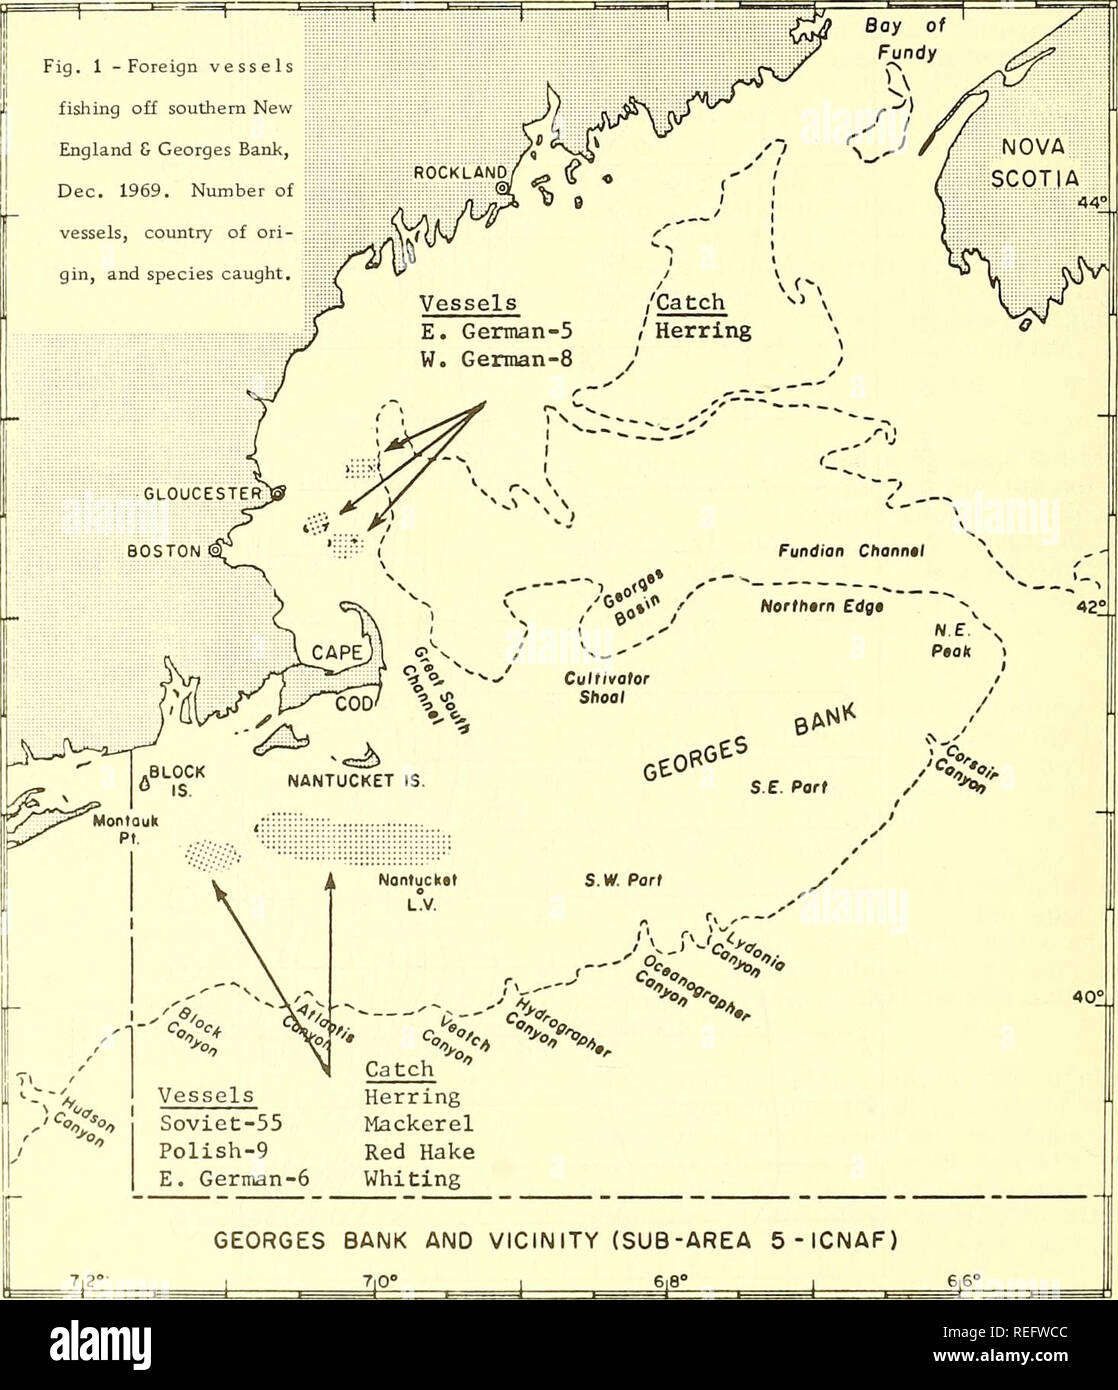 Commercial fisheries review. Fisheries; Fish trade. FOREIGN FISHING OFF  U.S., DECEMBER 1969 NORTHWEST ATLANTIC (Fig. 1) InDecember 1969, 80 vessels  were sighted (105 in Nov. 1969; 36 in Dec. 1968). USSR